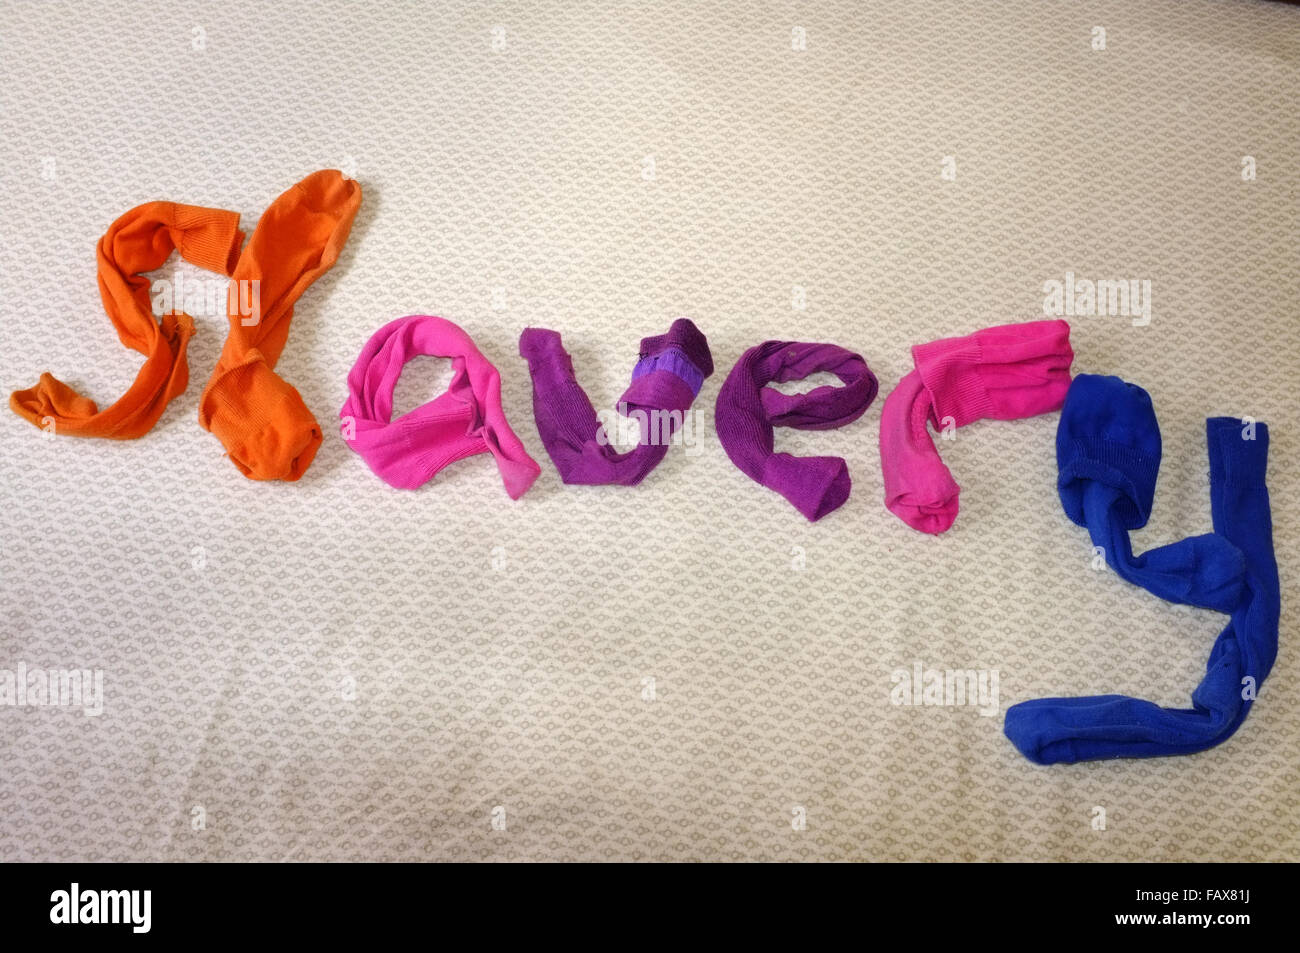 The word slavery made out of colourful socks laying on a duvet cover. Stock Photo